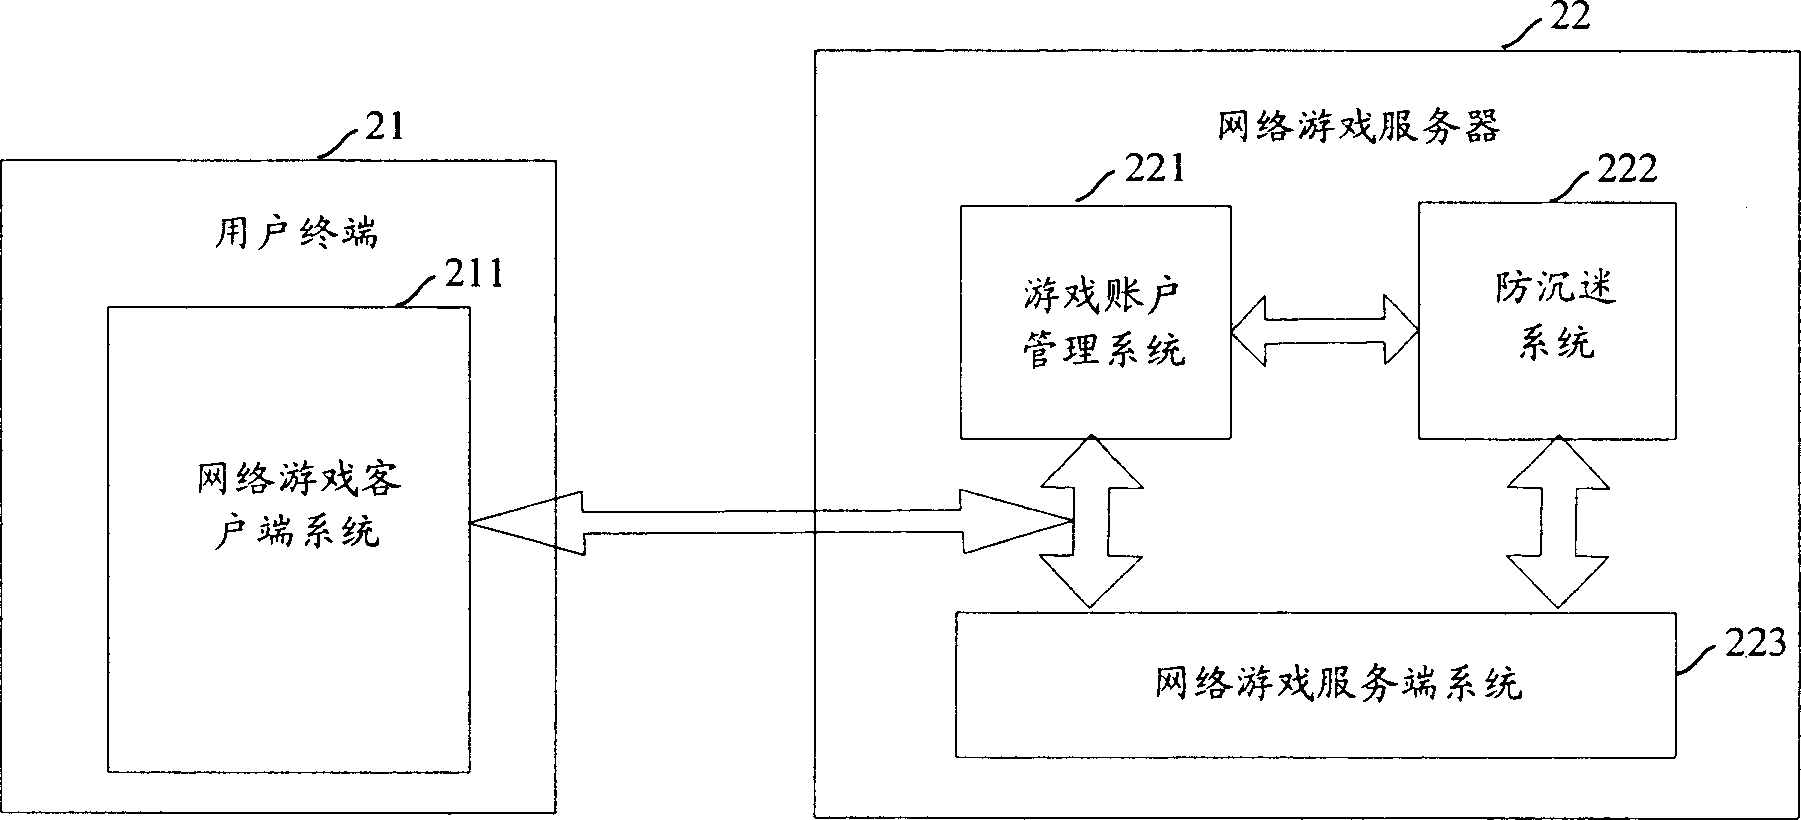 Method and system for limiting time of network gaming user